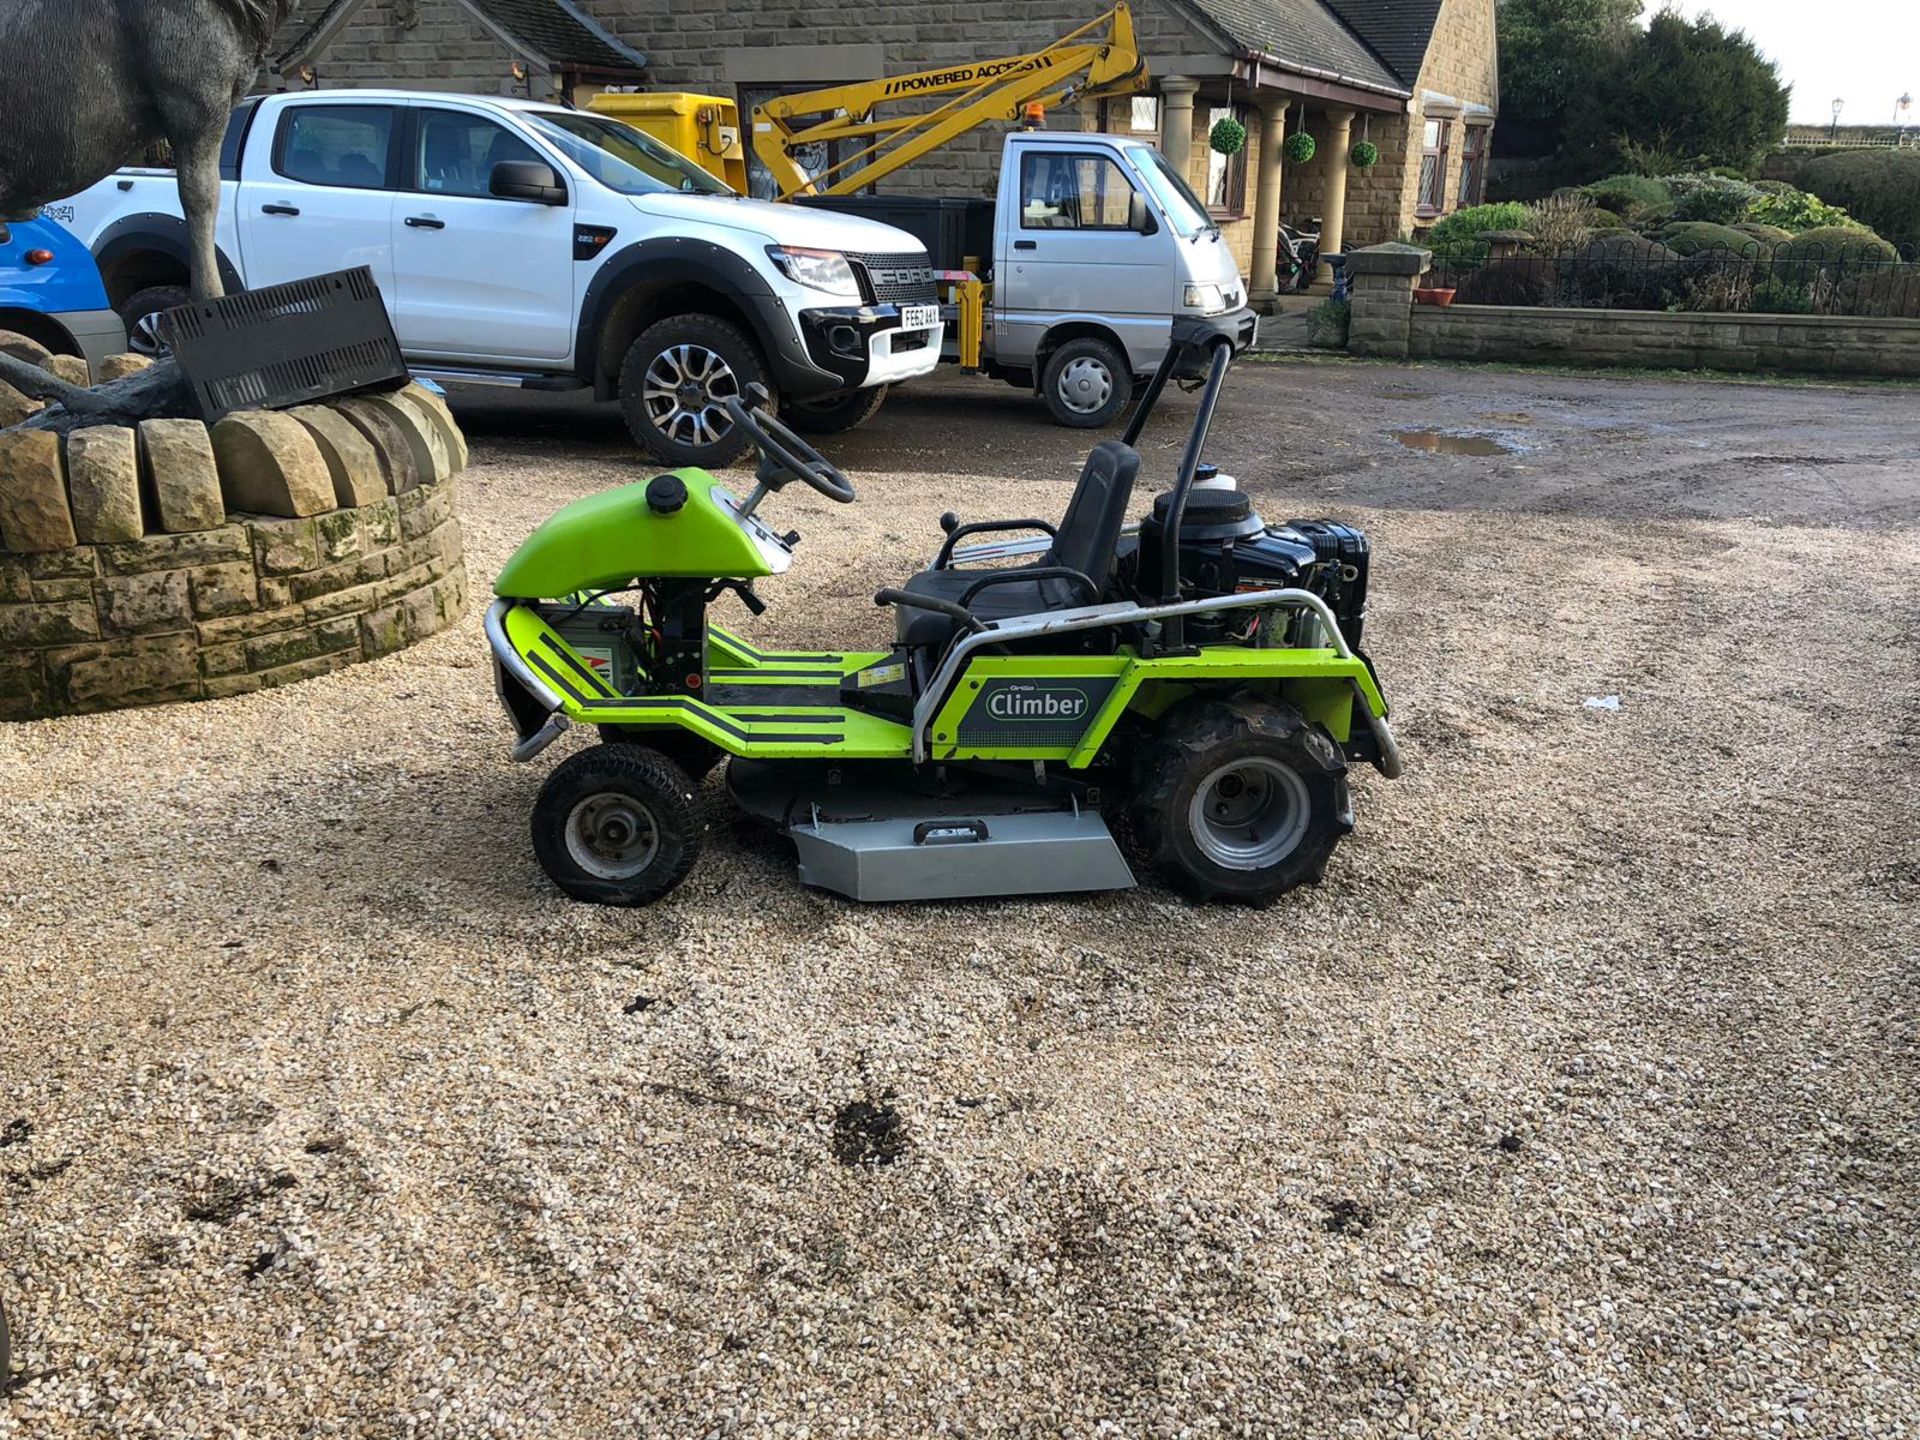 GRILLO CLIMBER 921 PETROL RIDE ON LAWN MOWER FOR BANKS AND ROUGH CUT, RUNS WORKS & CUTS *NO VAT* - Image 3 of 7